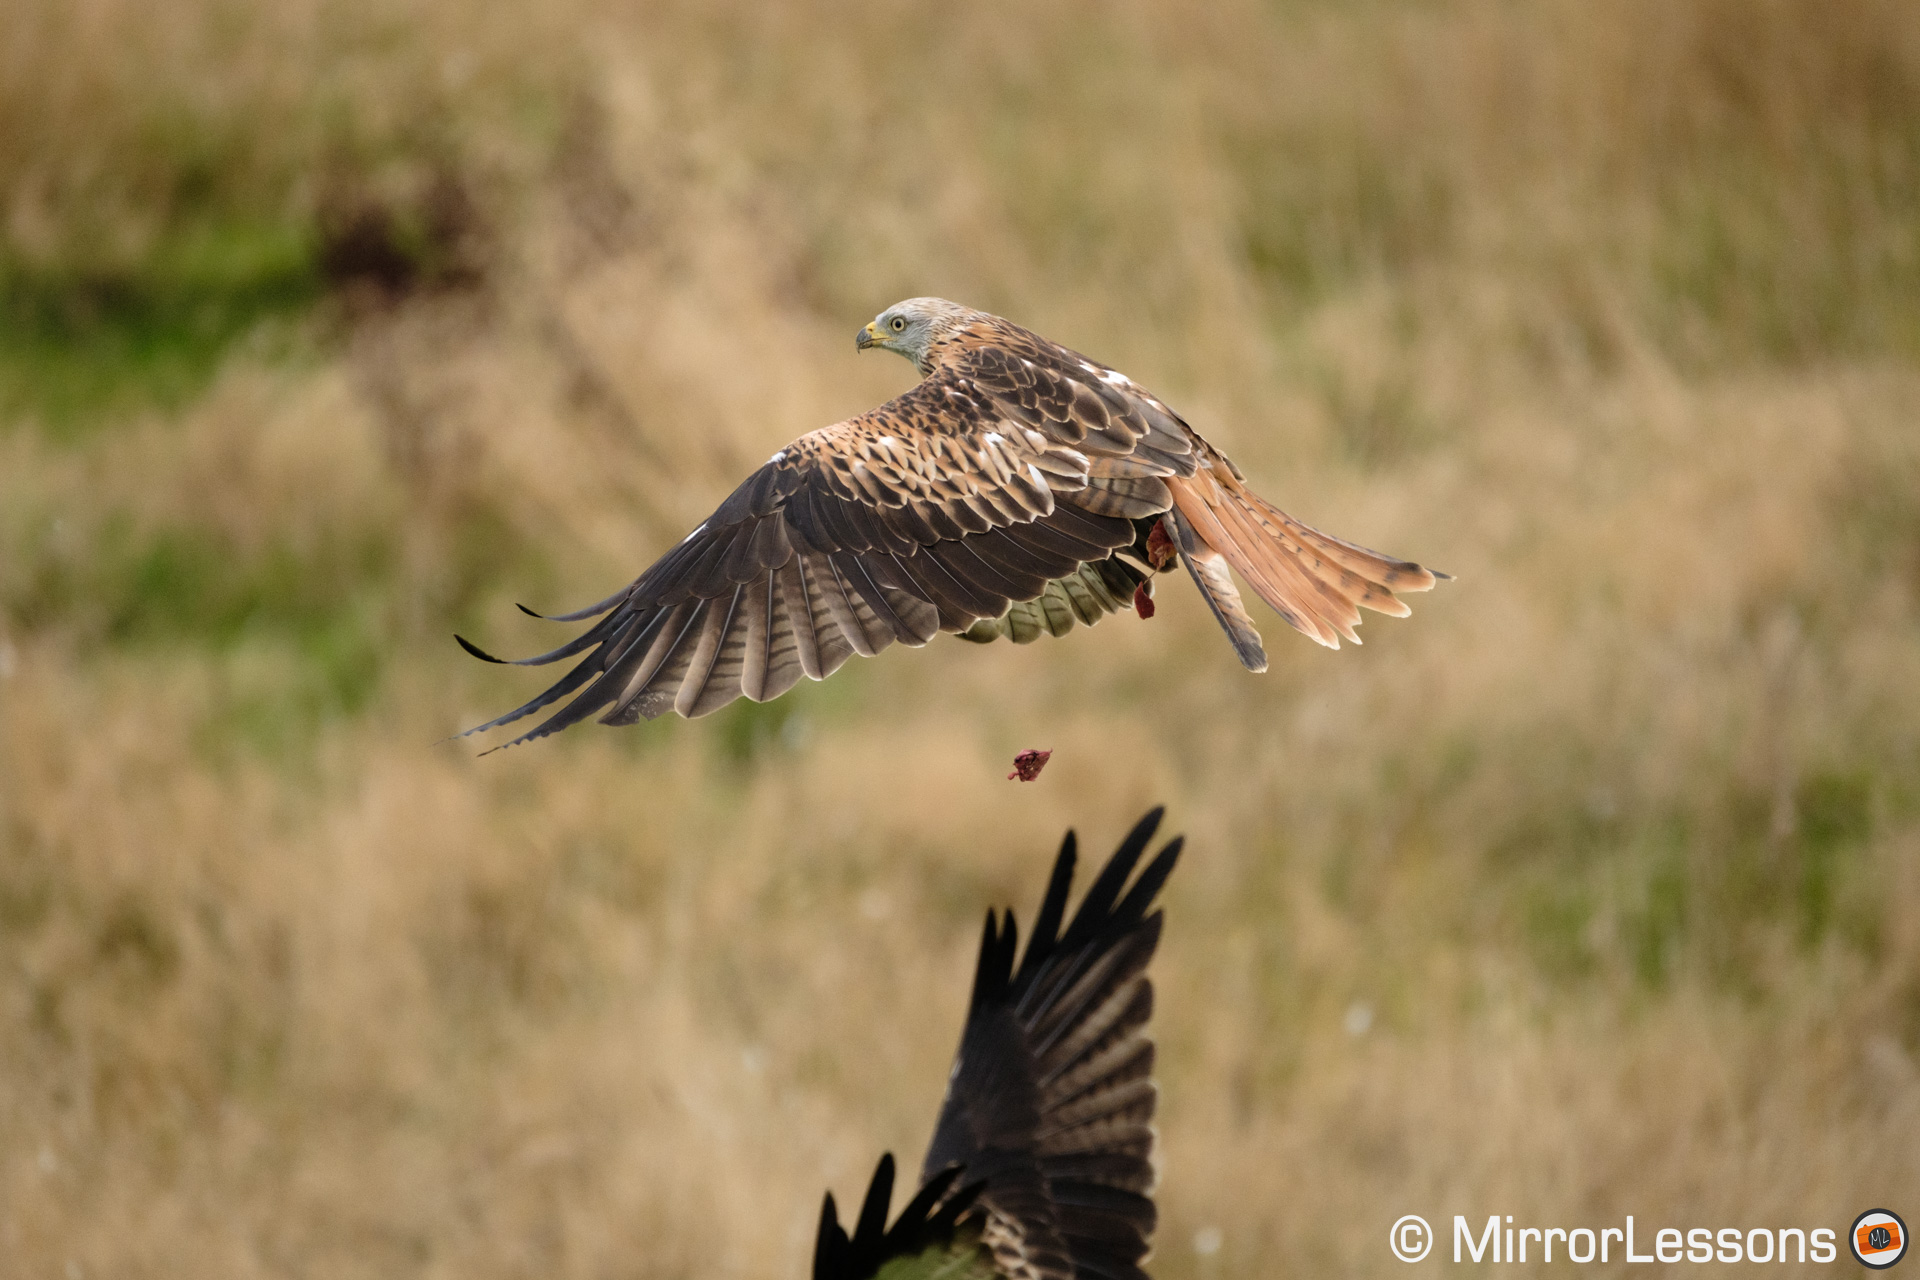 Red kite in flight drops a piece of meat